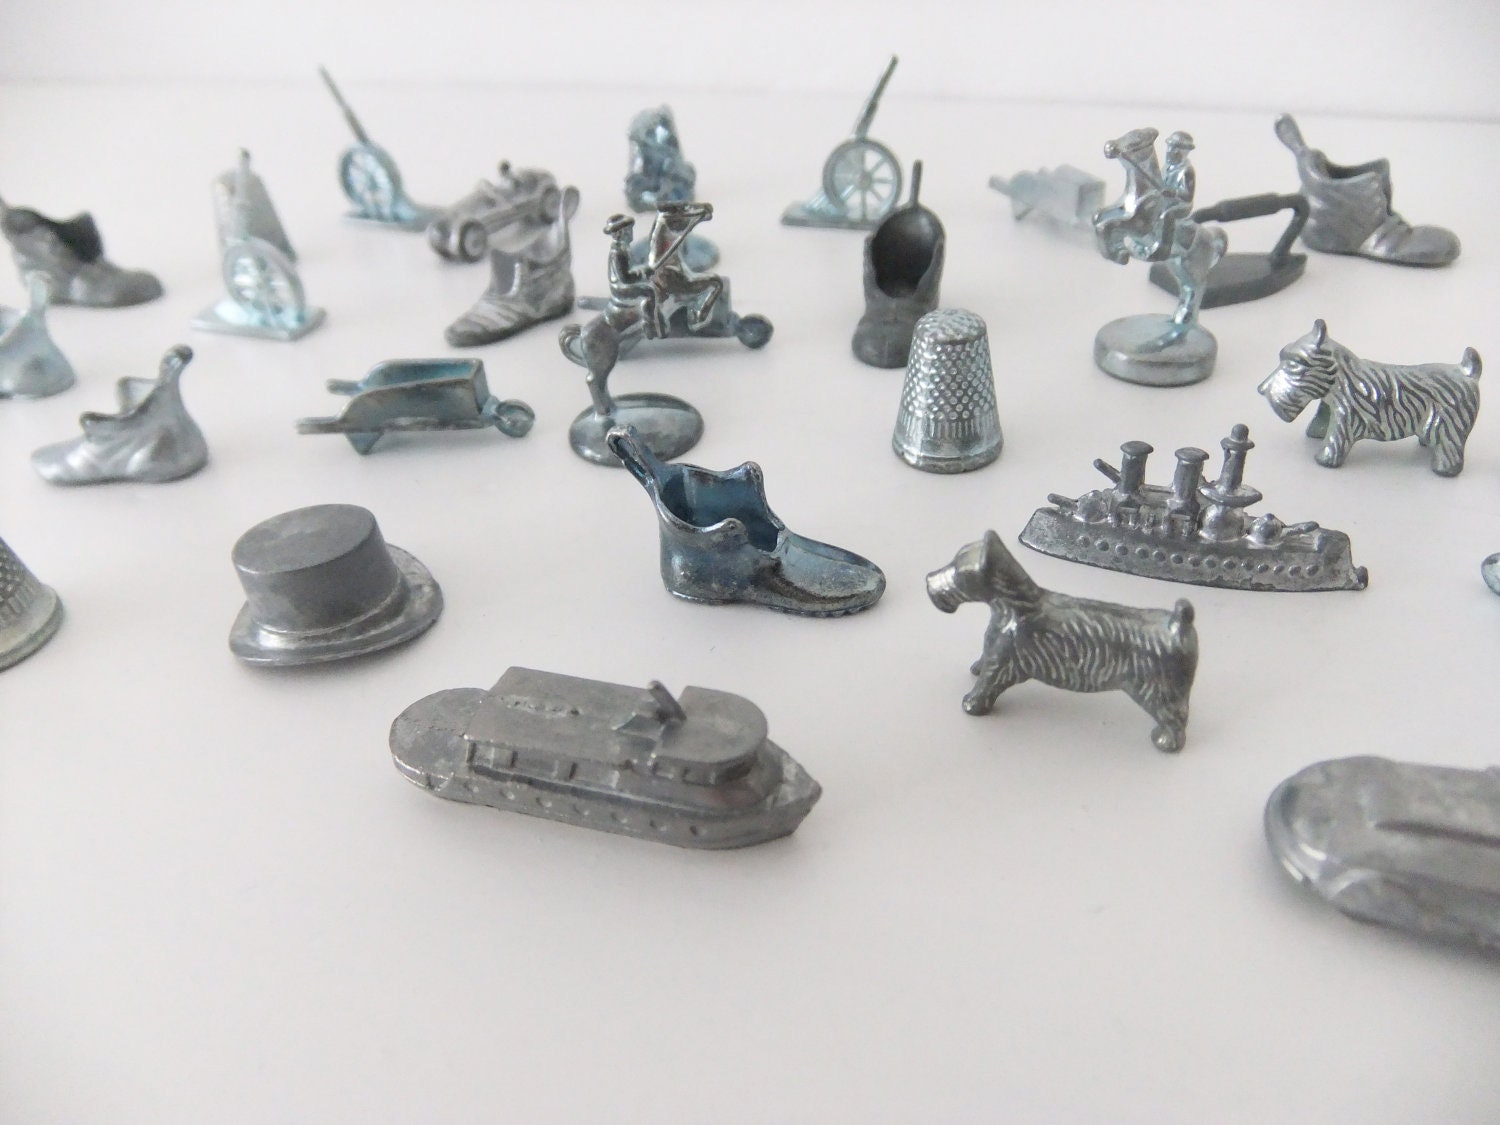 history of monopoly game pieces